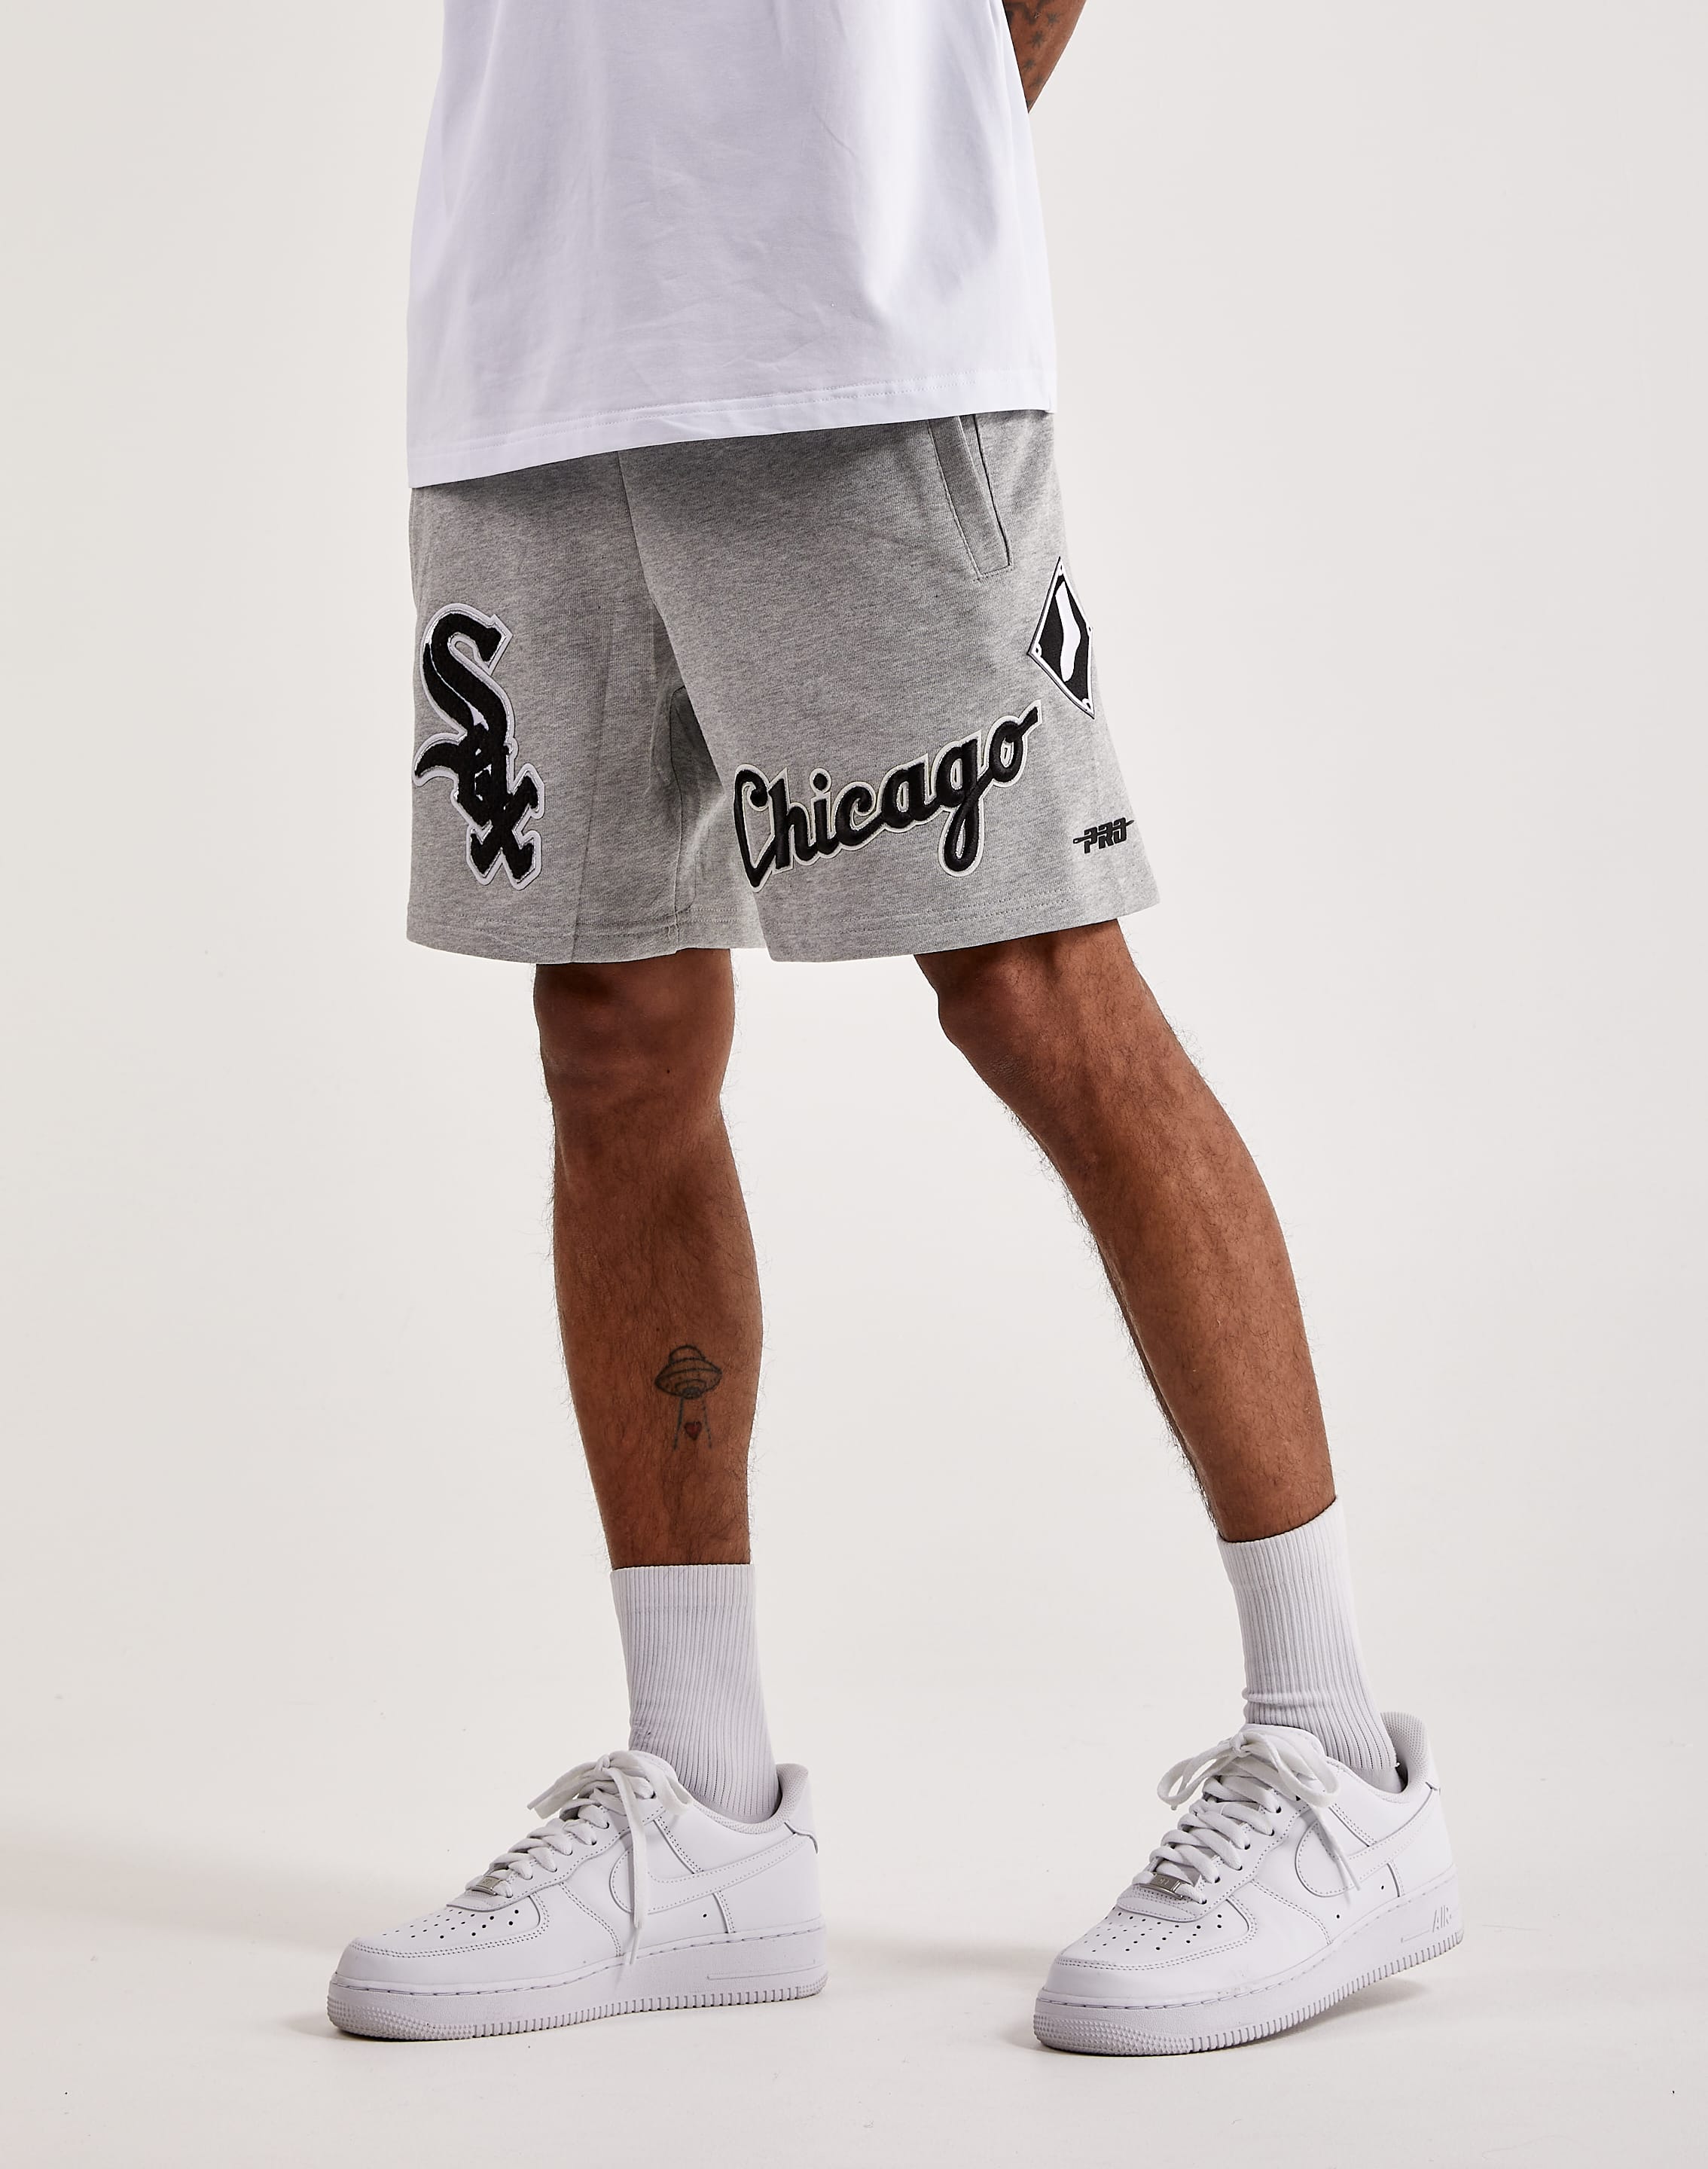 Chicago White Sox Shorts Discount, SAVE 46% 